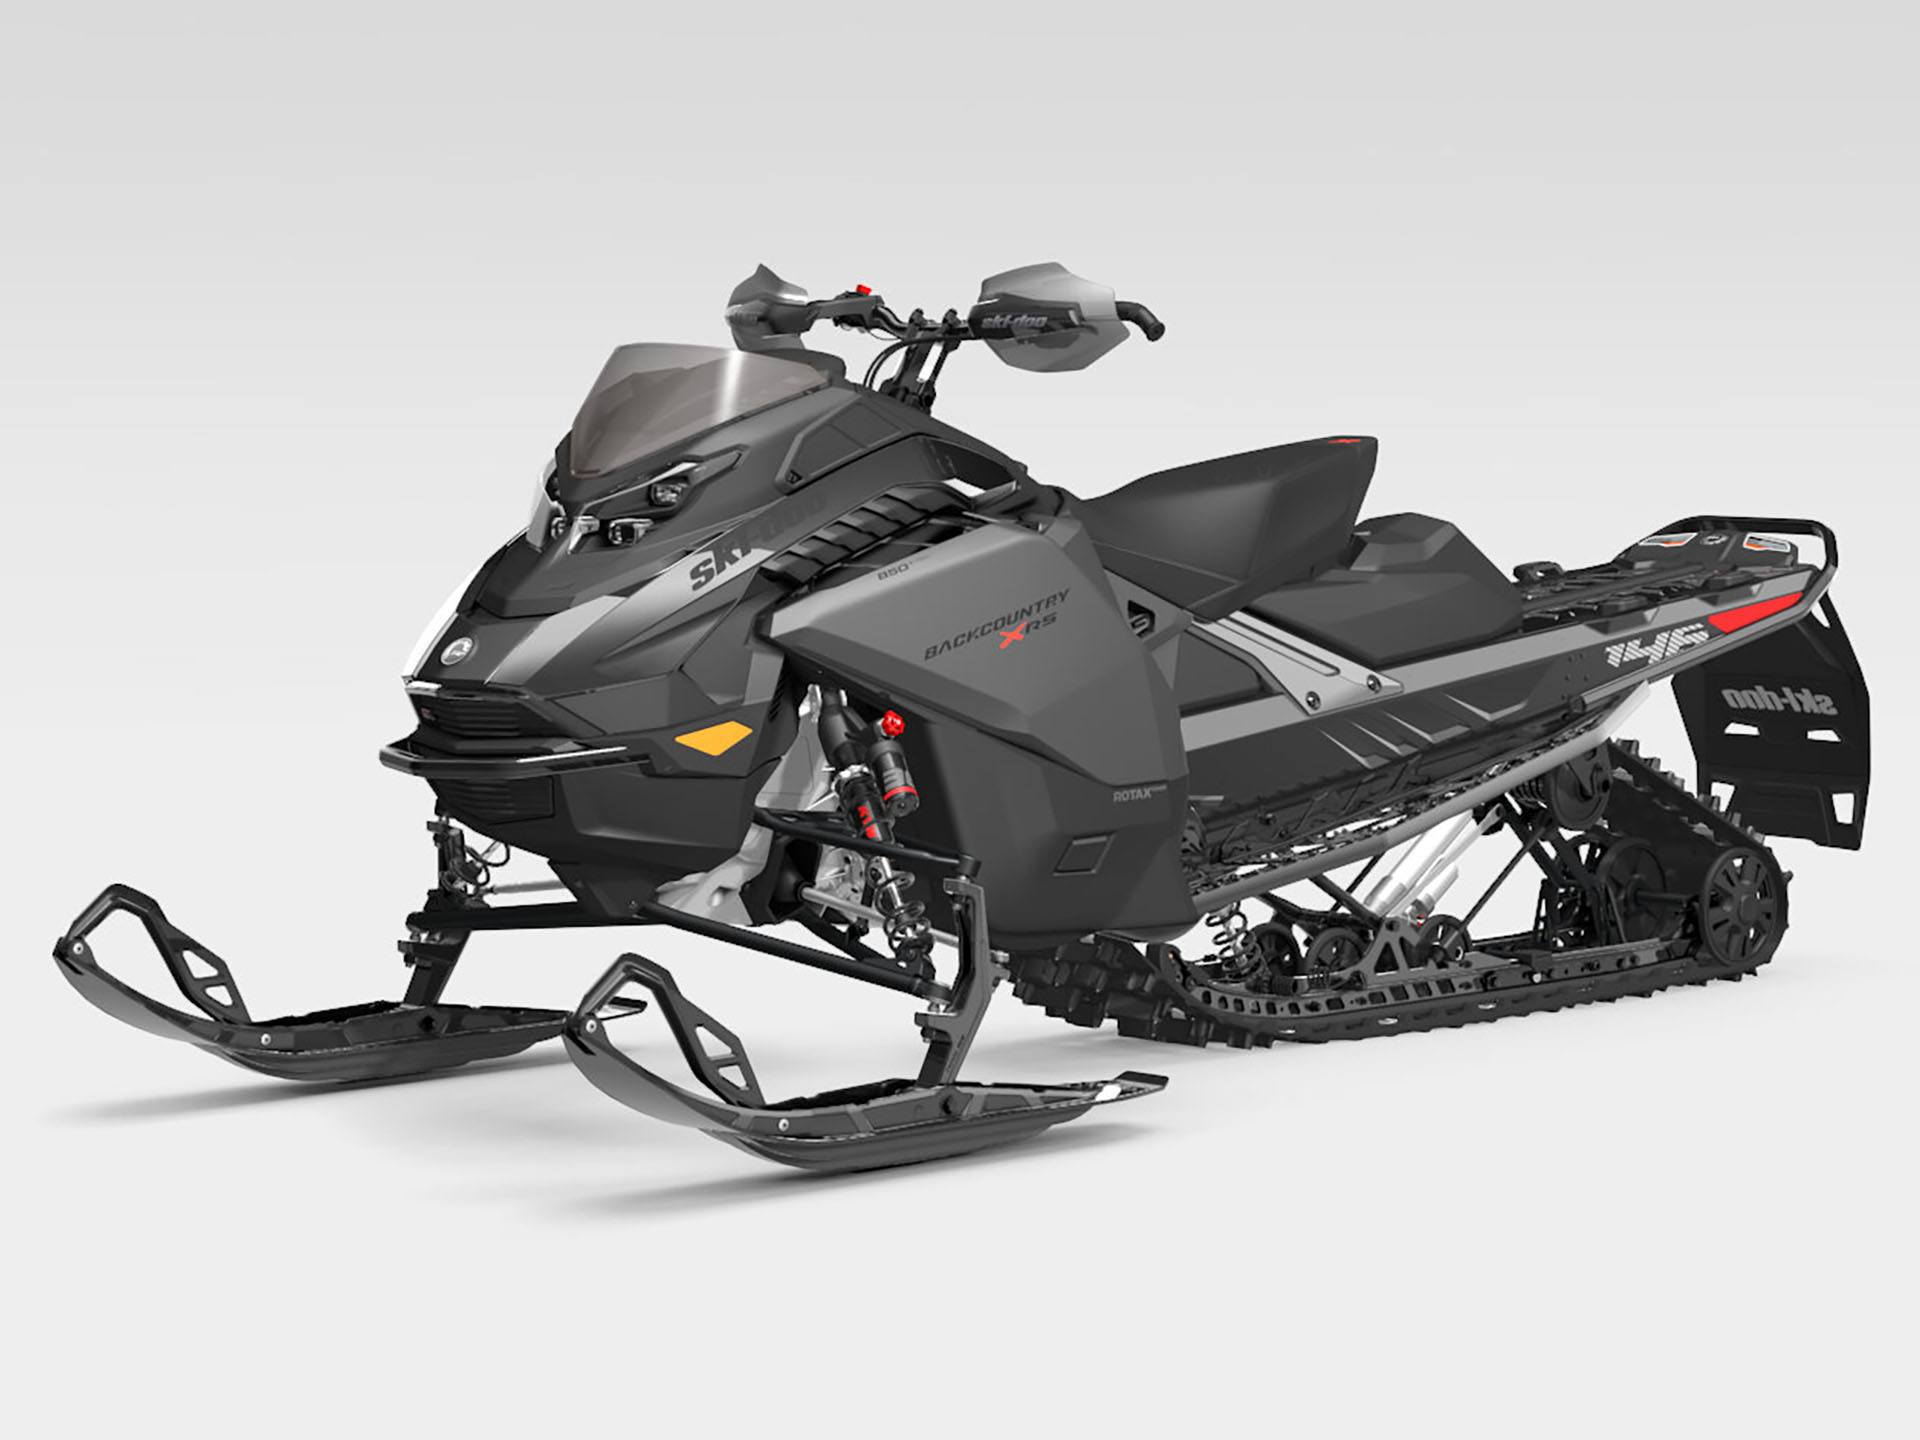 2025 Ski-Doo Backcountry X-RS 146 850 E-TEC ES Ice Storm 150 1.5 Ski Stance 43 in. w/ 10.25 in. Touchscreen in Lancaster, New Hampshire - Photo 2